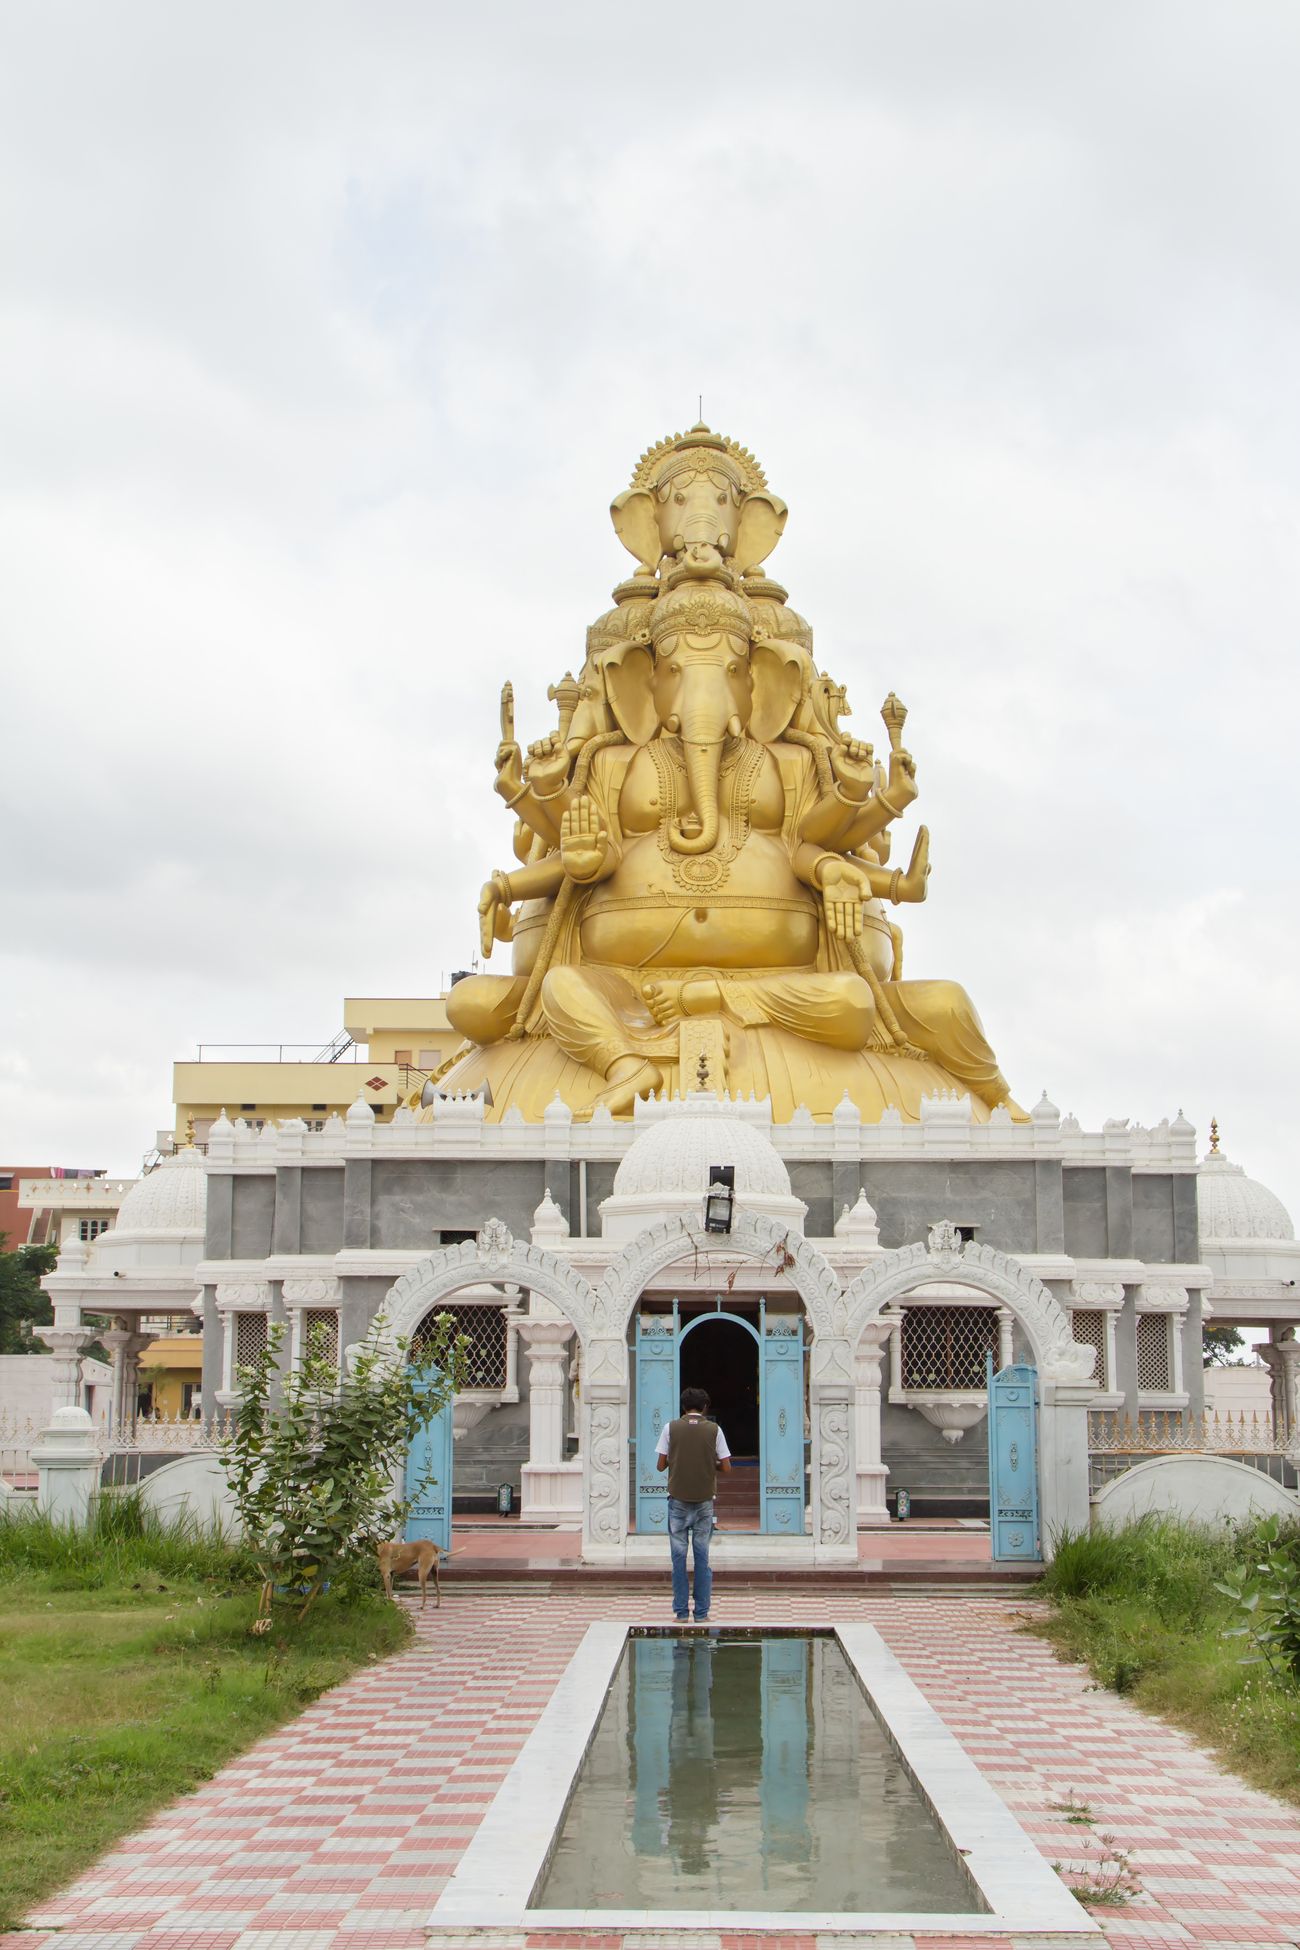 An Indian devotee stands and worships the giant statue of Ganesha, one of the most widely worshipped deities in Hindu religion, on the outskirts of Bangalore. This huge statue of Ganesha on the Bangalore-Mysore road is five-faced